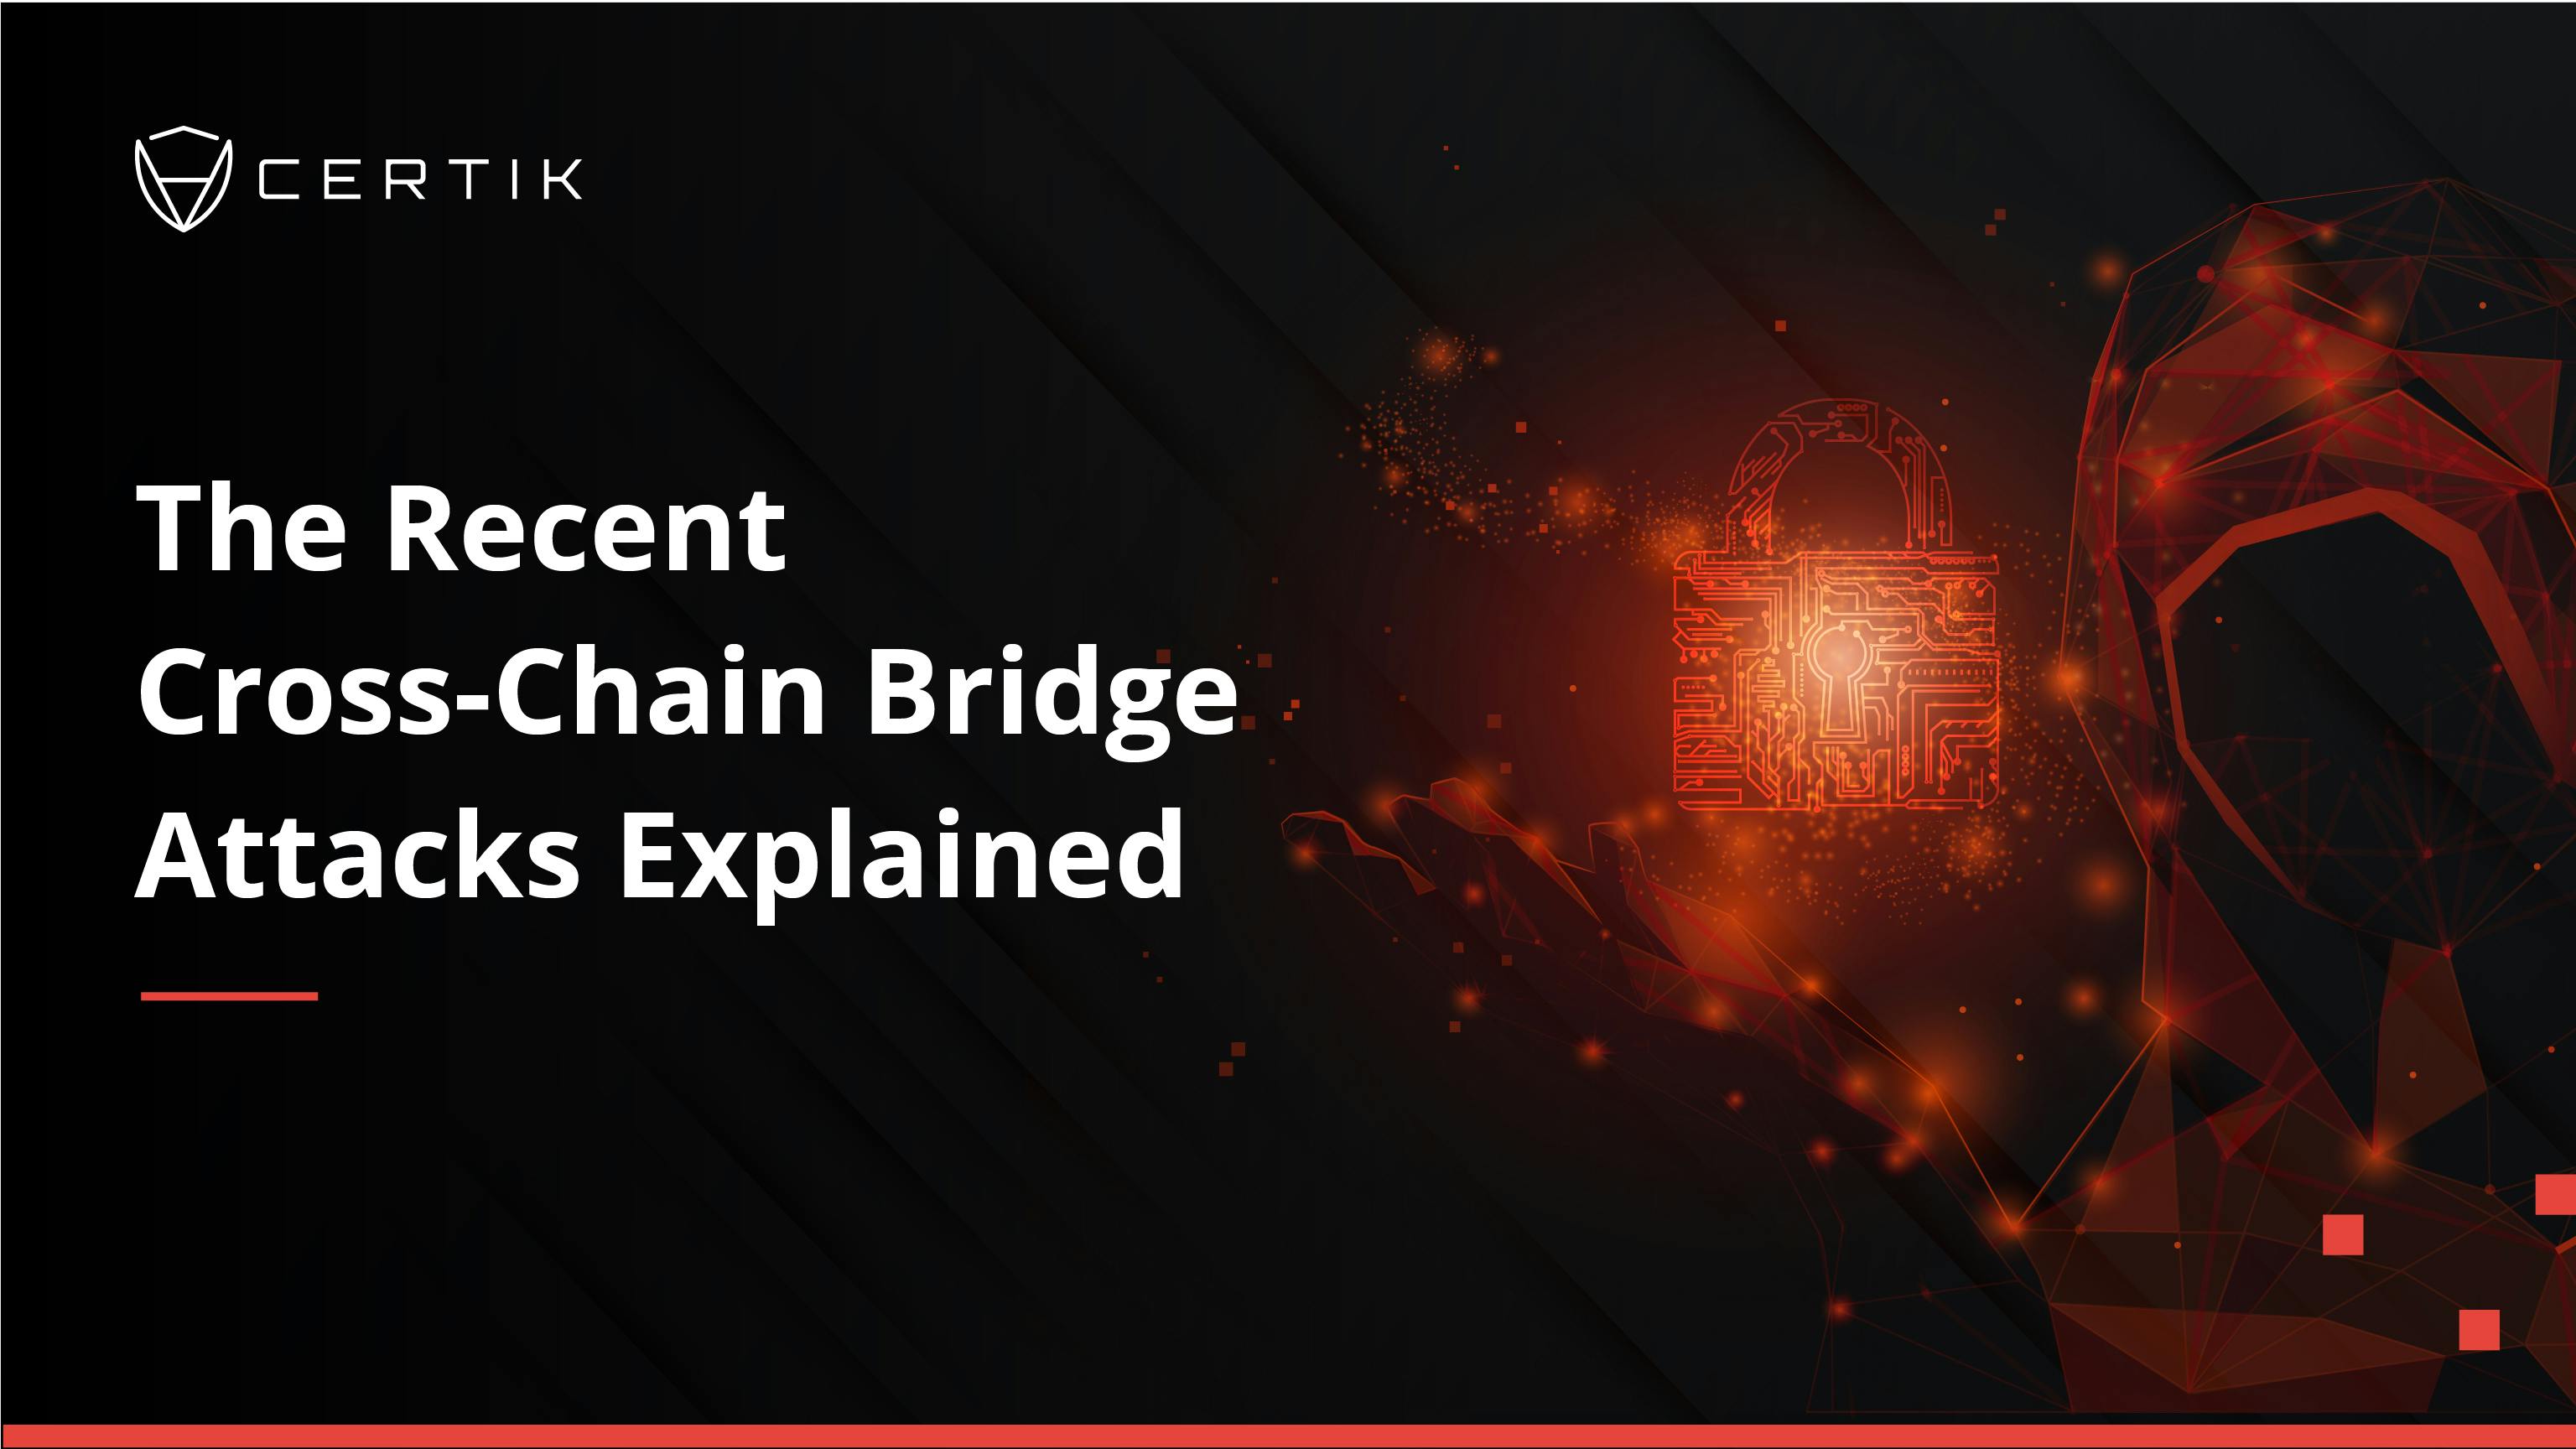 What to Learn From Recent Cross-Chain Bridge Attacks